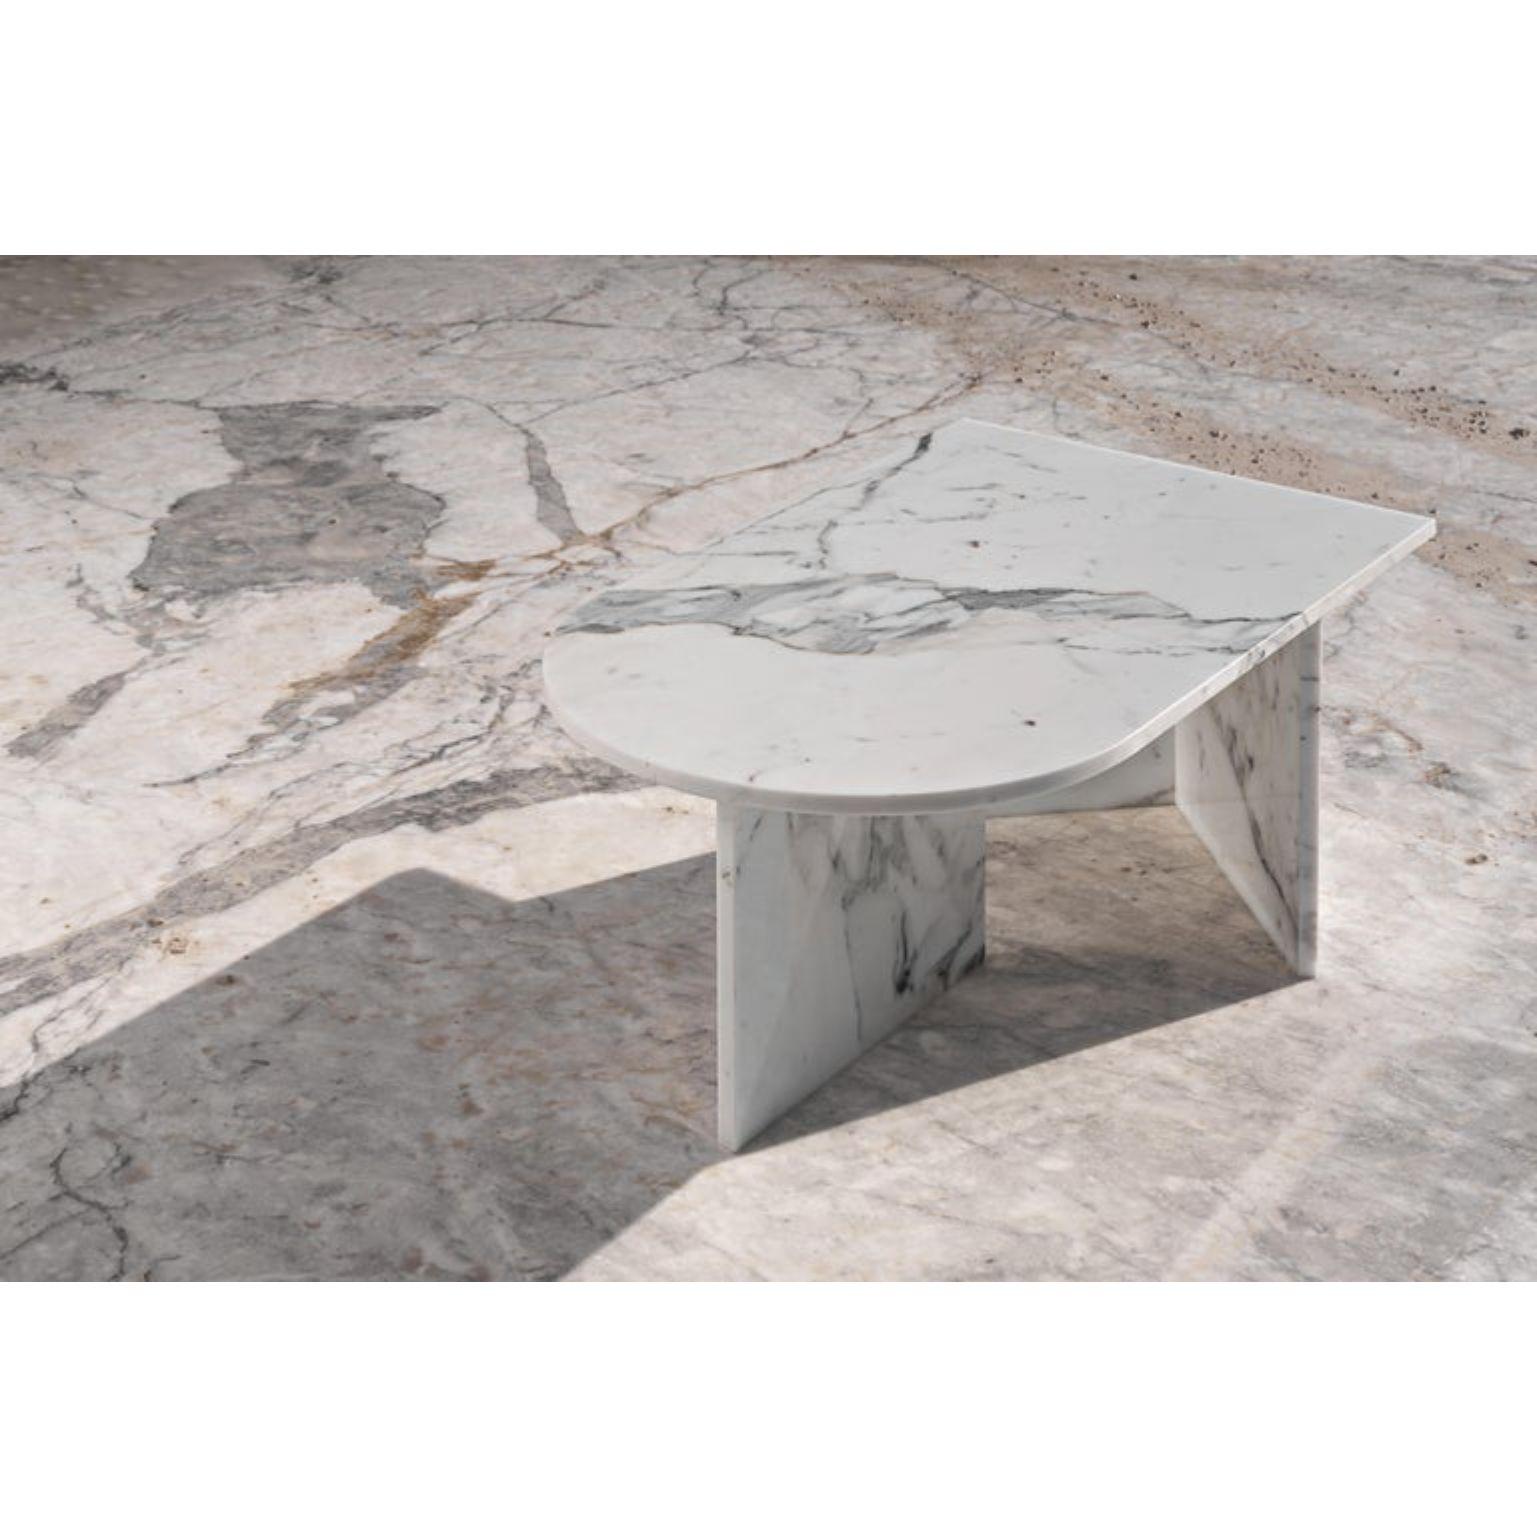 Bas marble coffee table by Edition Club
Edition 6 of 6
Dimensions: L 90 x W 55 x H 40 cm
Materials: Features Arabascato marble direct from the hills of Carrara
65 kgs

Arabascato marble direct from the hills of Carrara, Italy with its